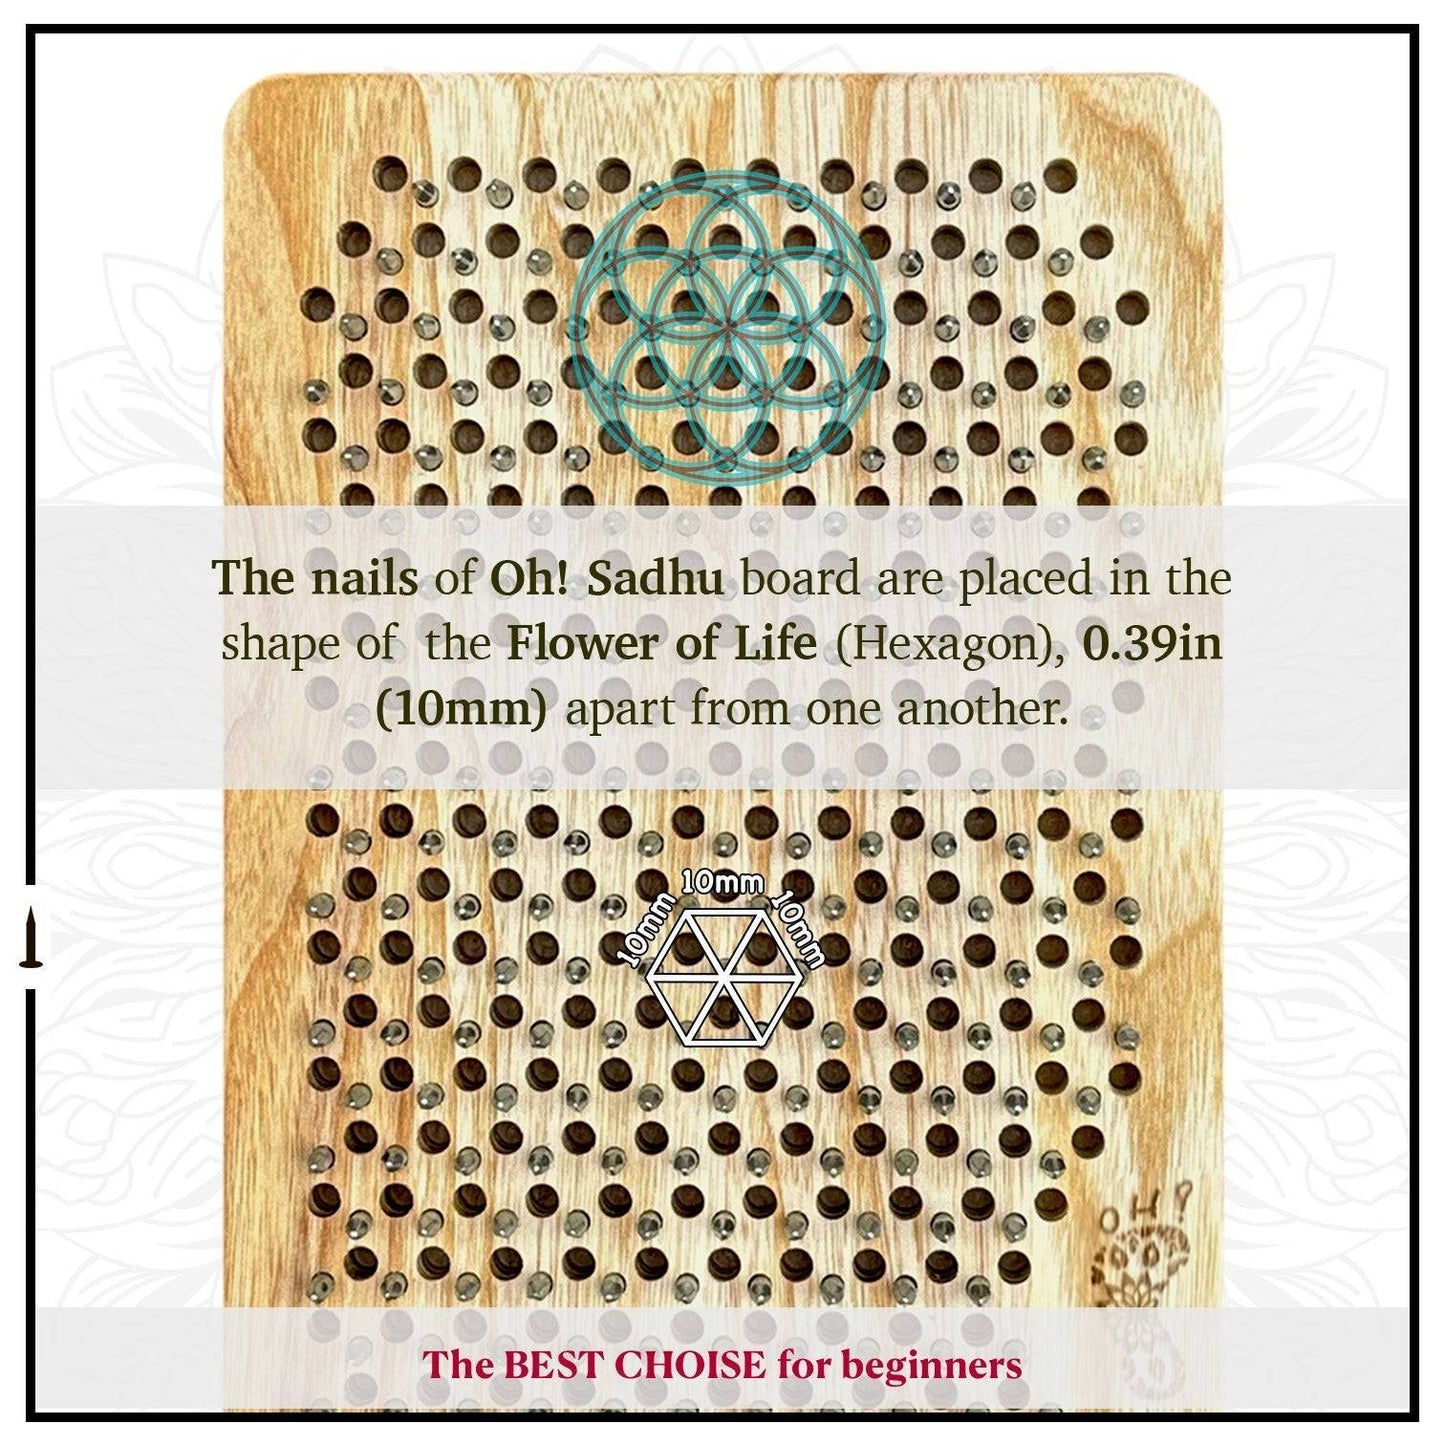 Nails on sadhu board arranged in shape flower of life with step 10mm